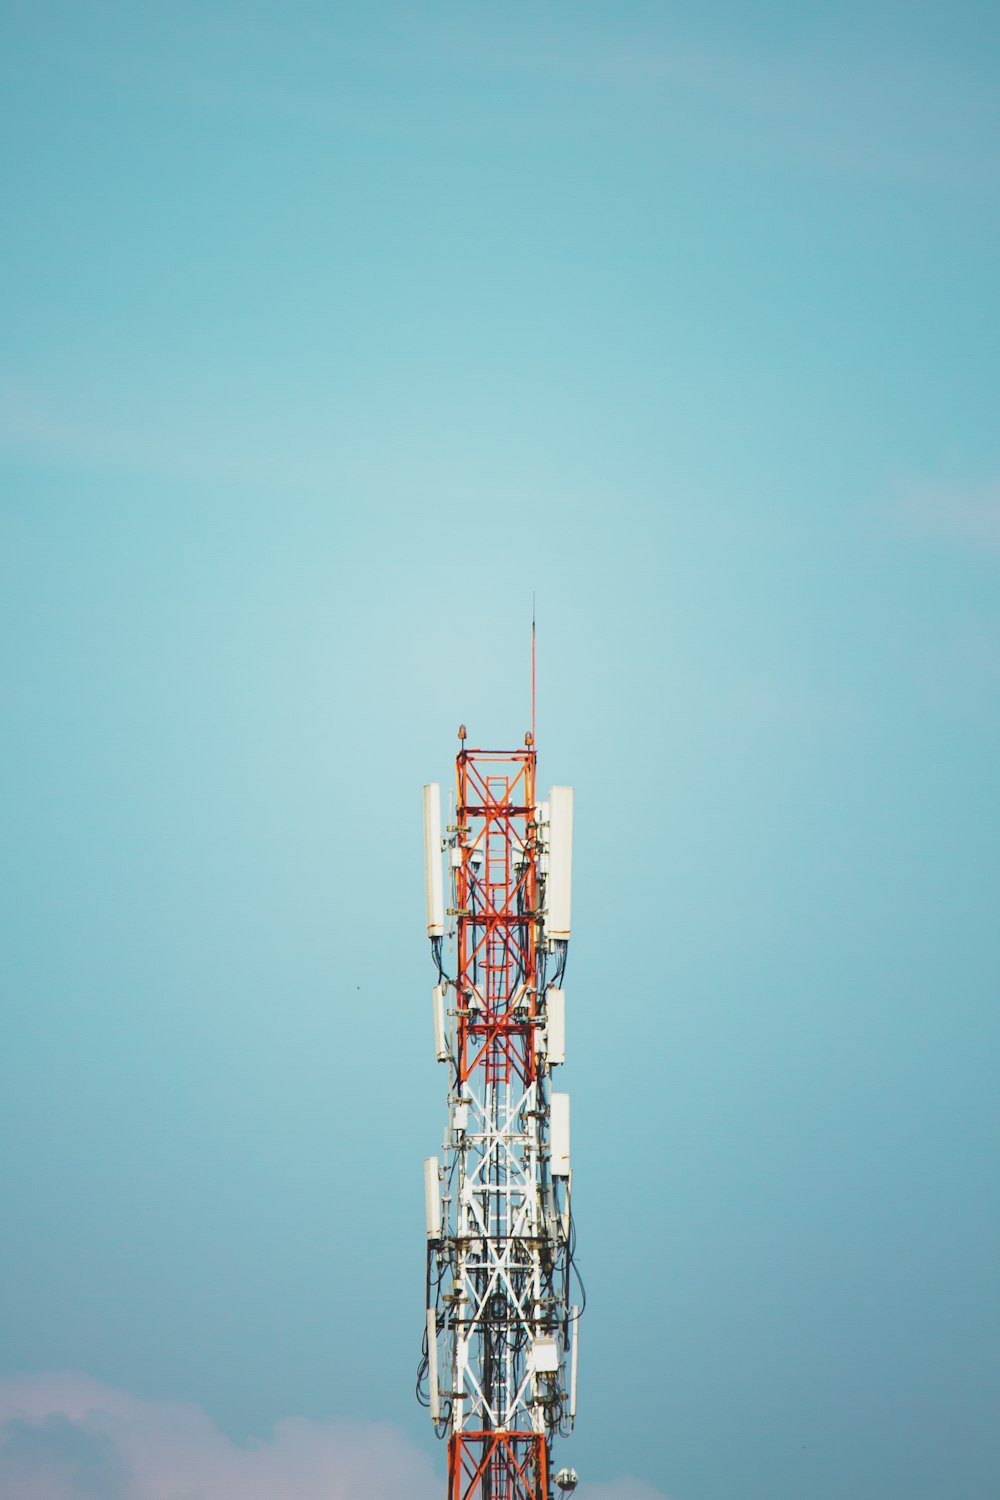 a tall tower with lots of antennas on top of it